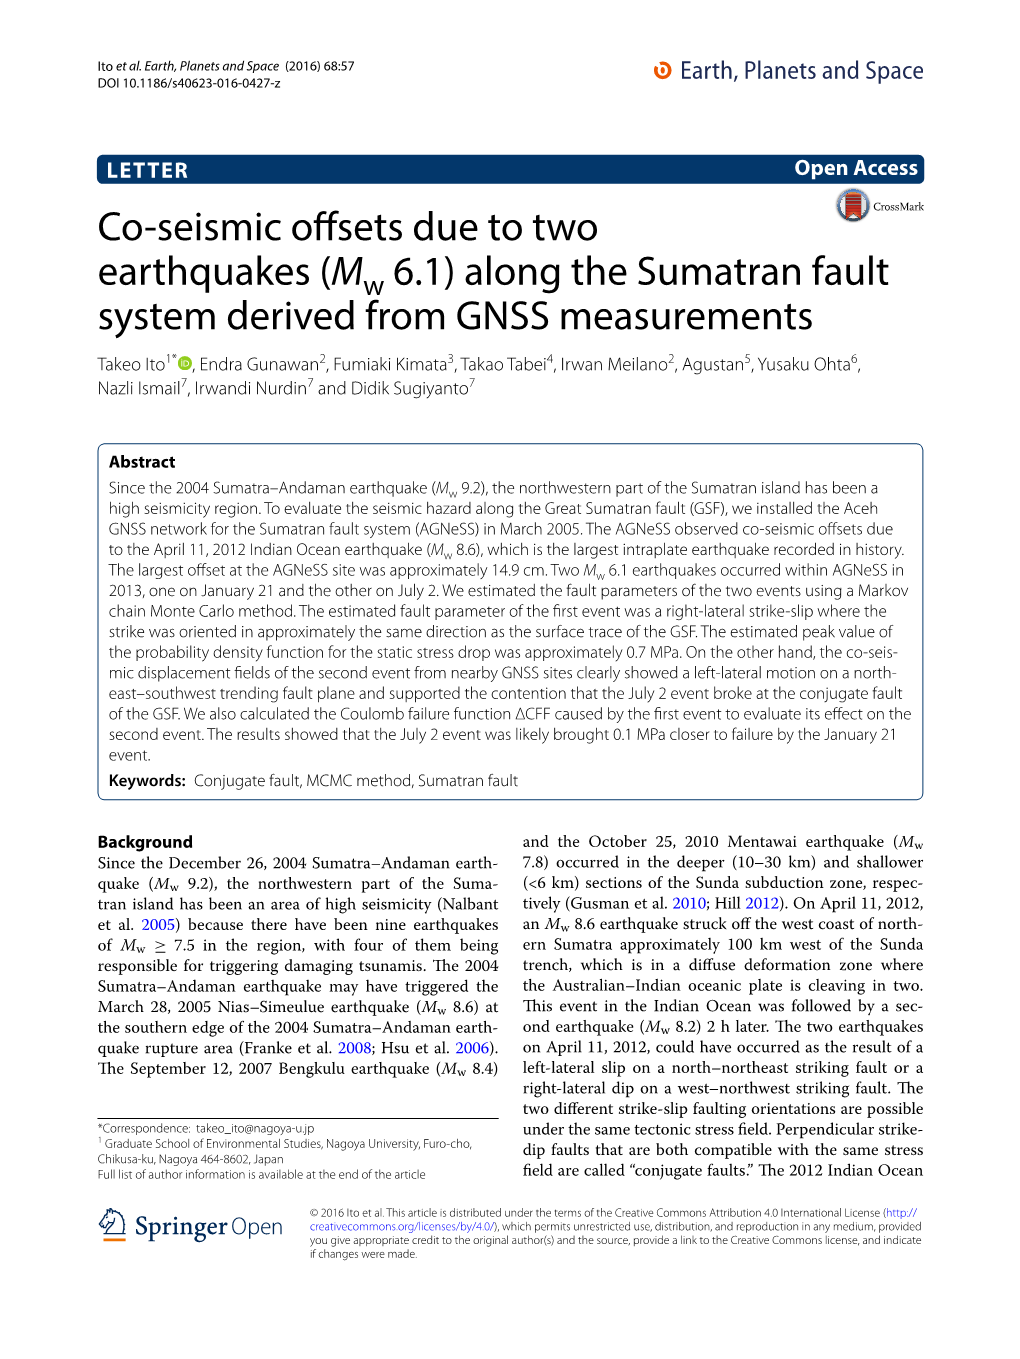 Along the Sumatran Fault System Derived from GNSS